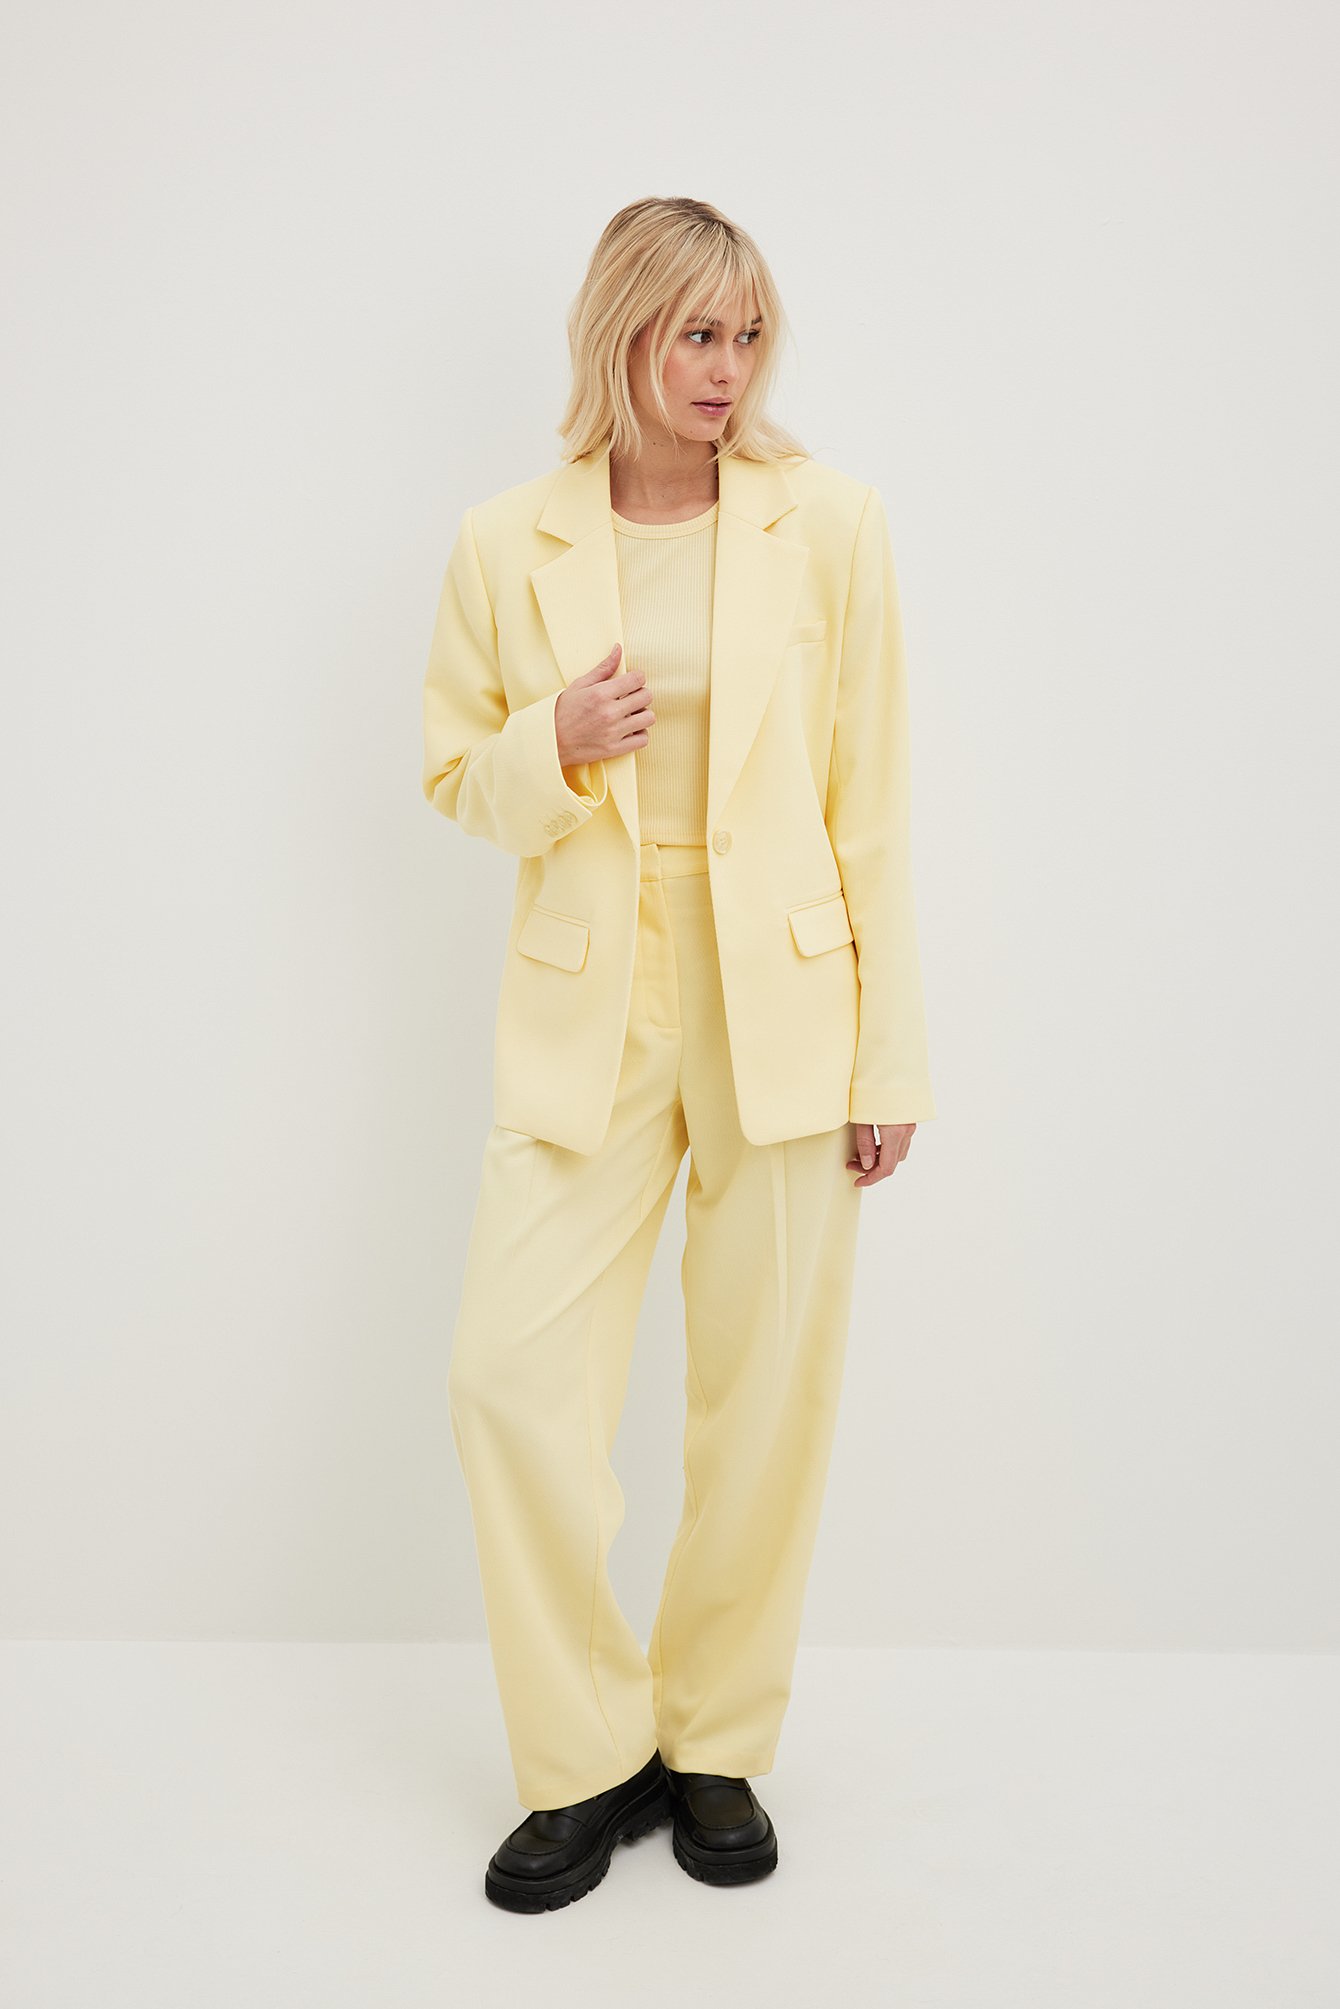 Yellow High Waisted Suit Trousers